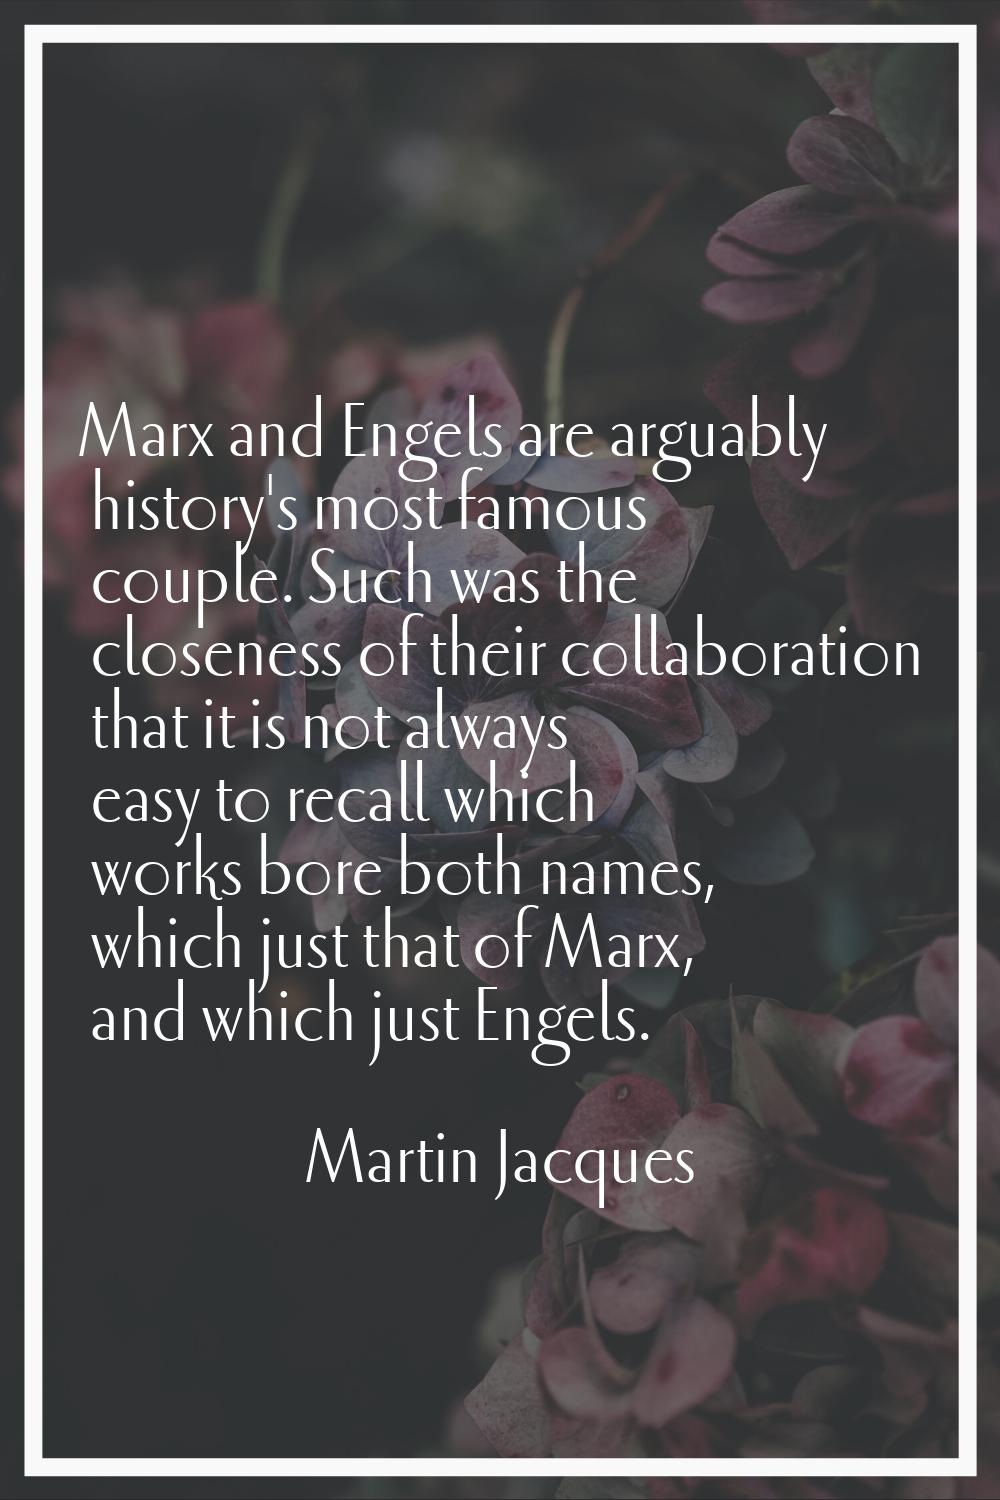 Marx and Engels are arguably history's most famous couple. Such was the closeness of their collabor